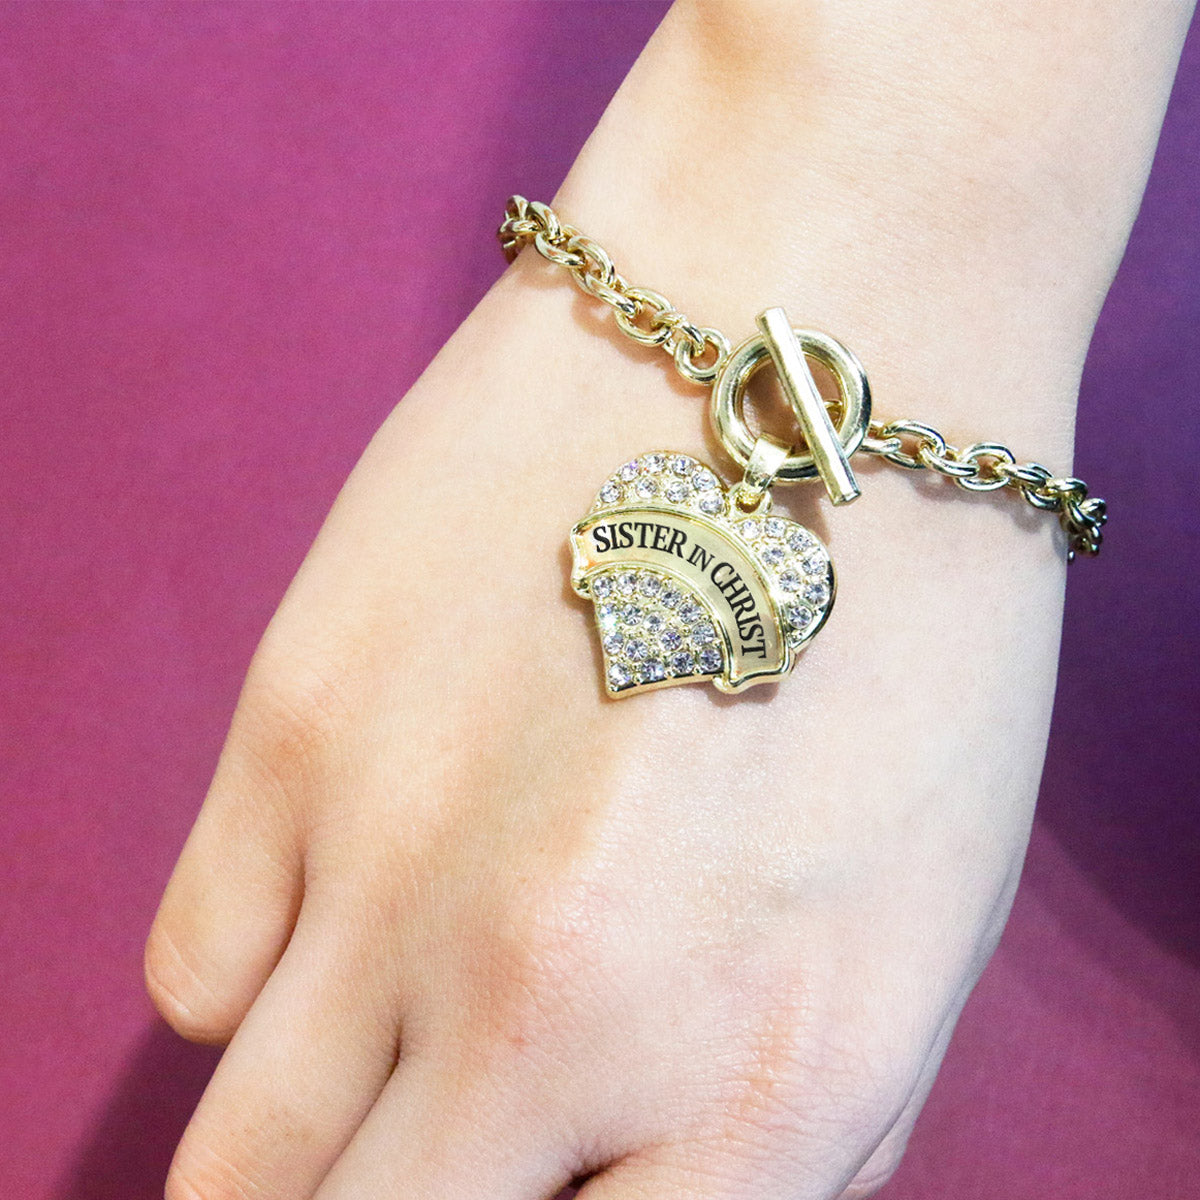 Gold Sister in Christ Pave Heart Charm Toggle Bracelet